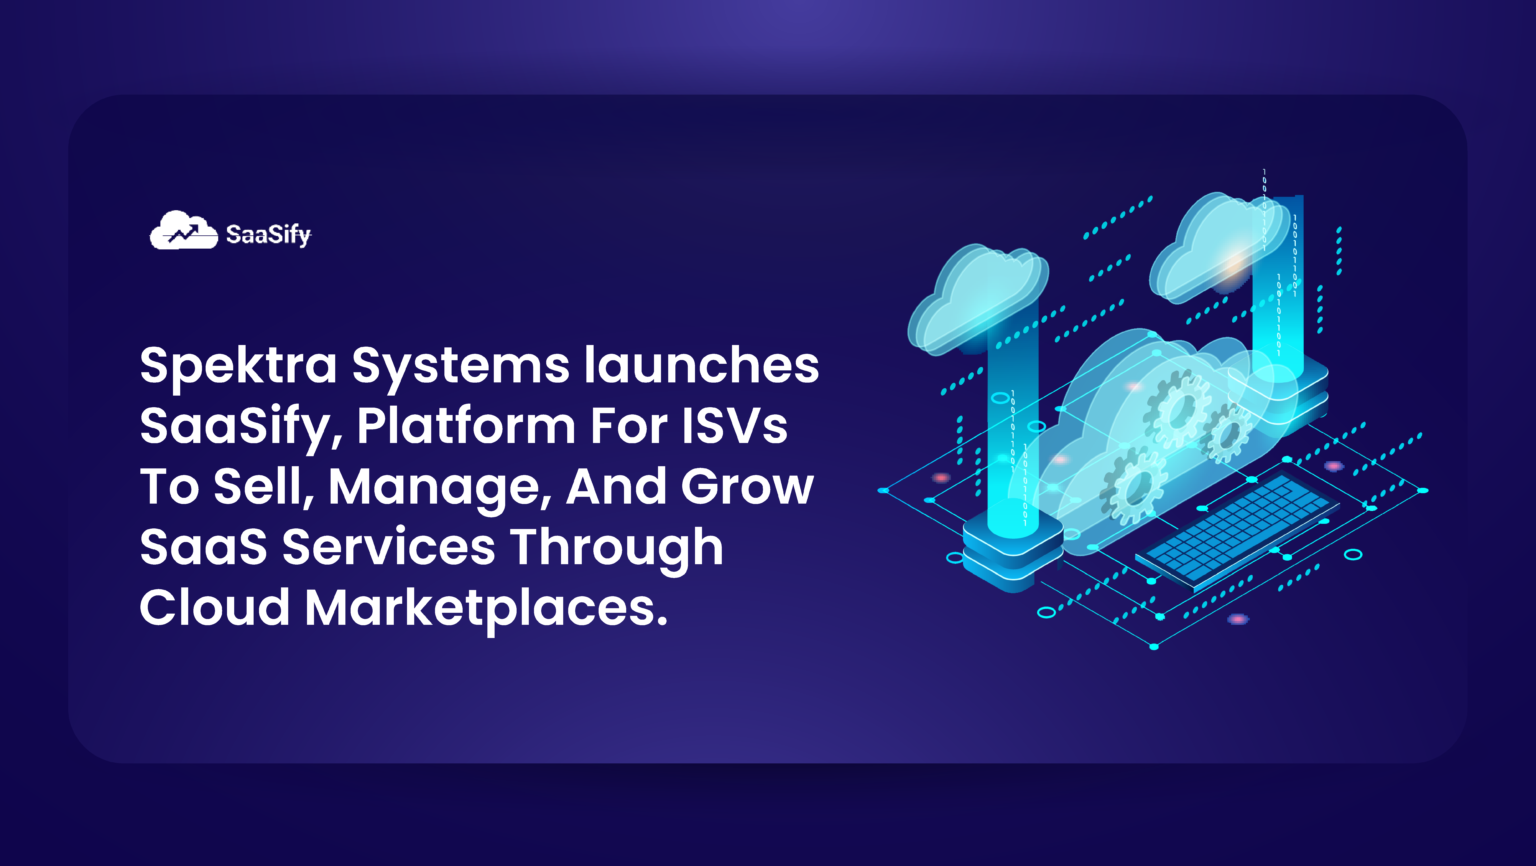 Spektra Systems launches SaaSify, platform for ISVs to sell, manage, and grow SaaS services through cloud marketplaces.